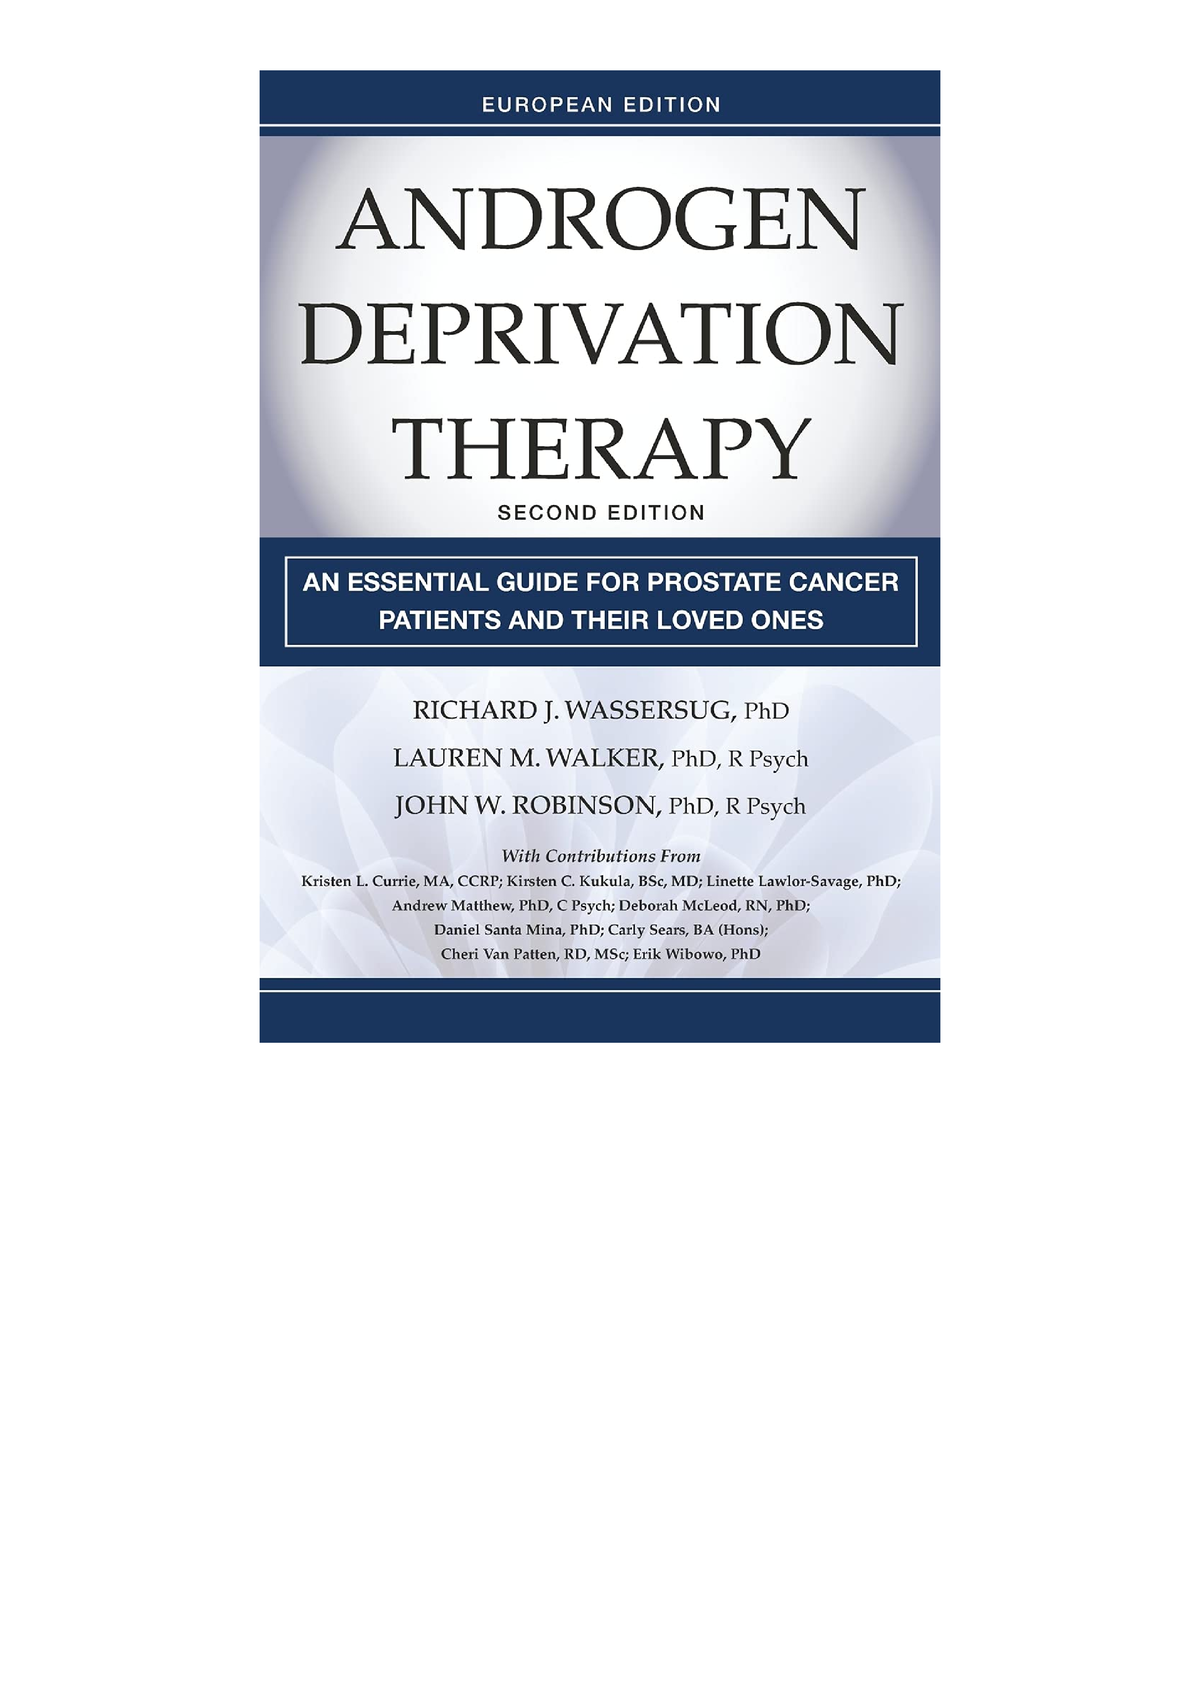 Download Androgen Deprivation Therapy 2nd Edition European Edition An Essential Guide For 8065